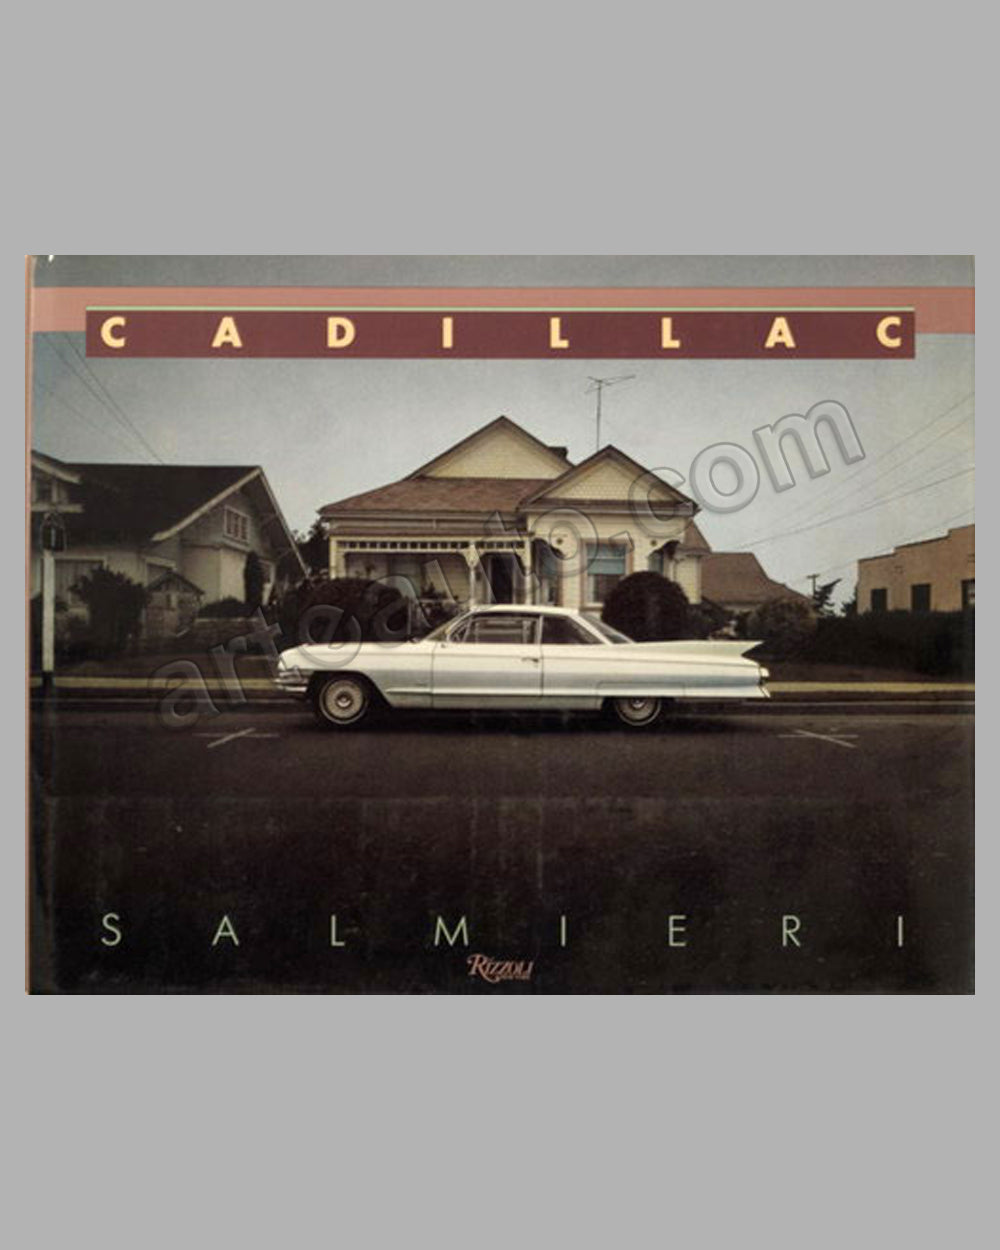 Cadillac book by S. Salmieri and O. Edwards, 1st ed., 1985